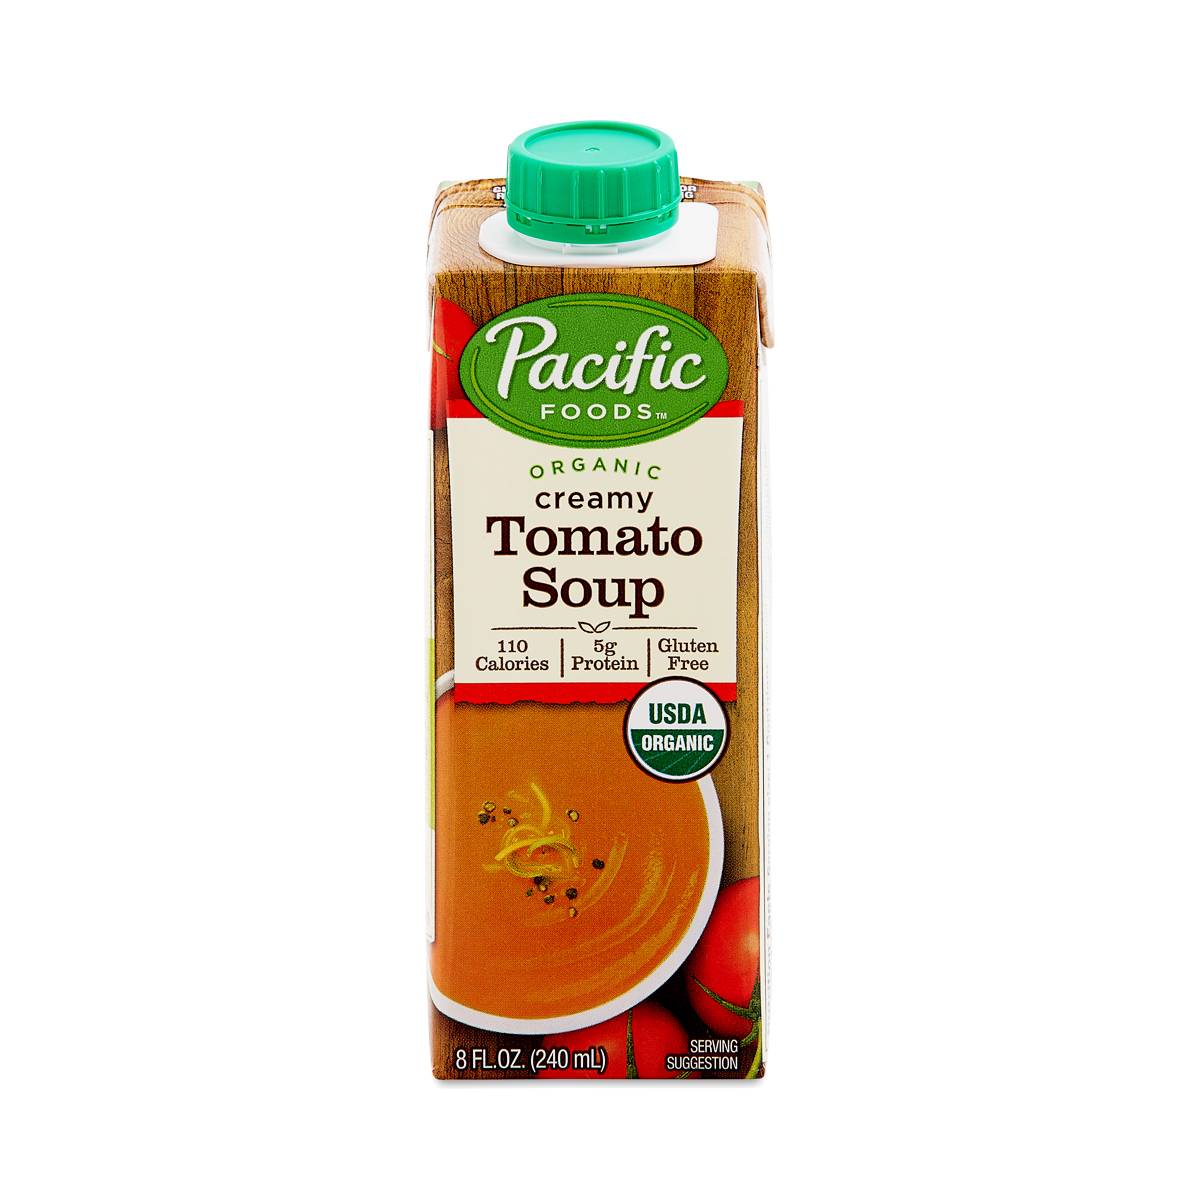 Organic Creamy Tomato Soup by Pacific Foods